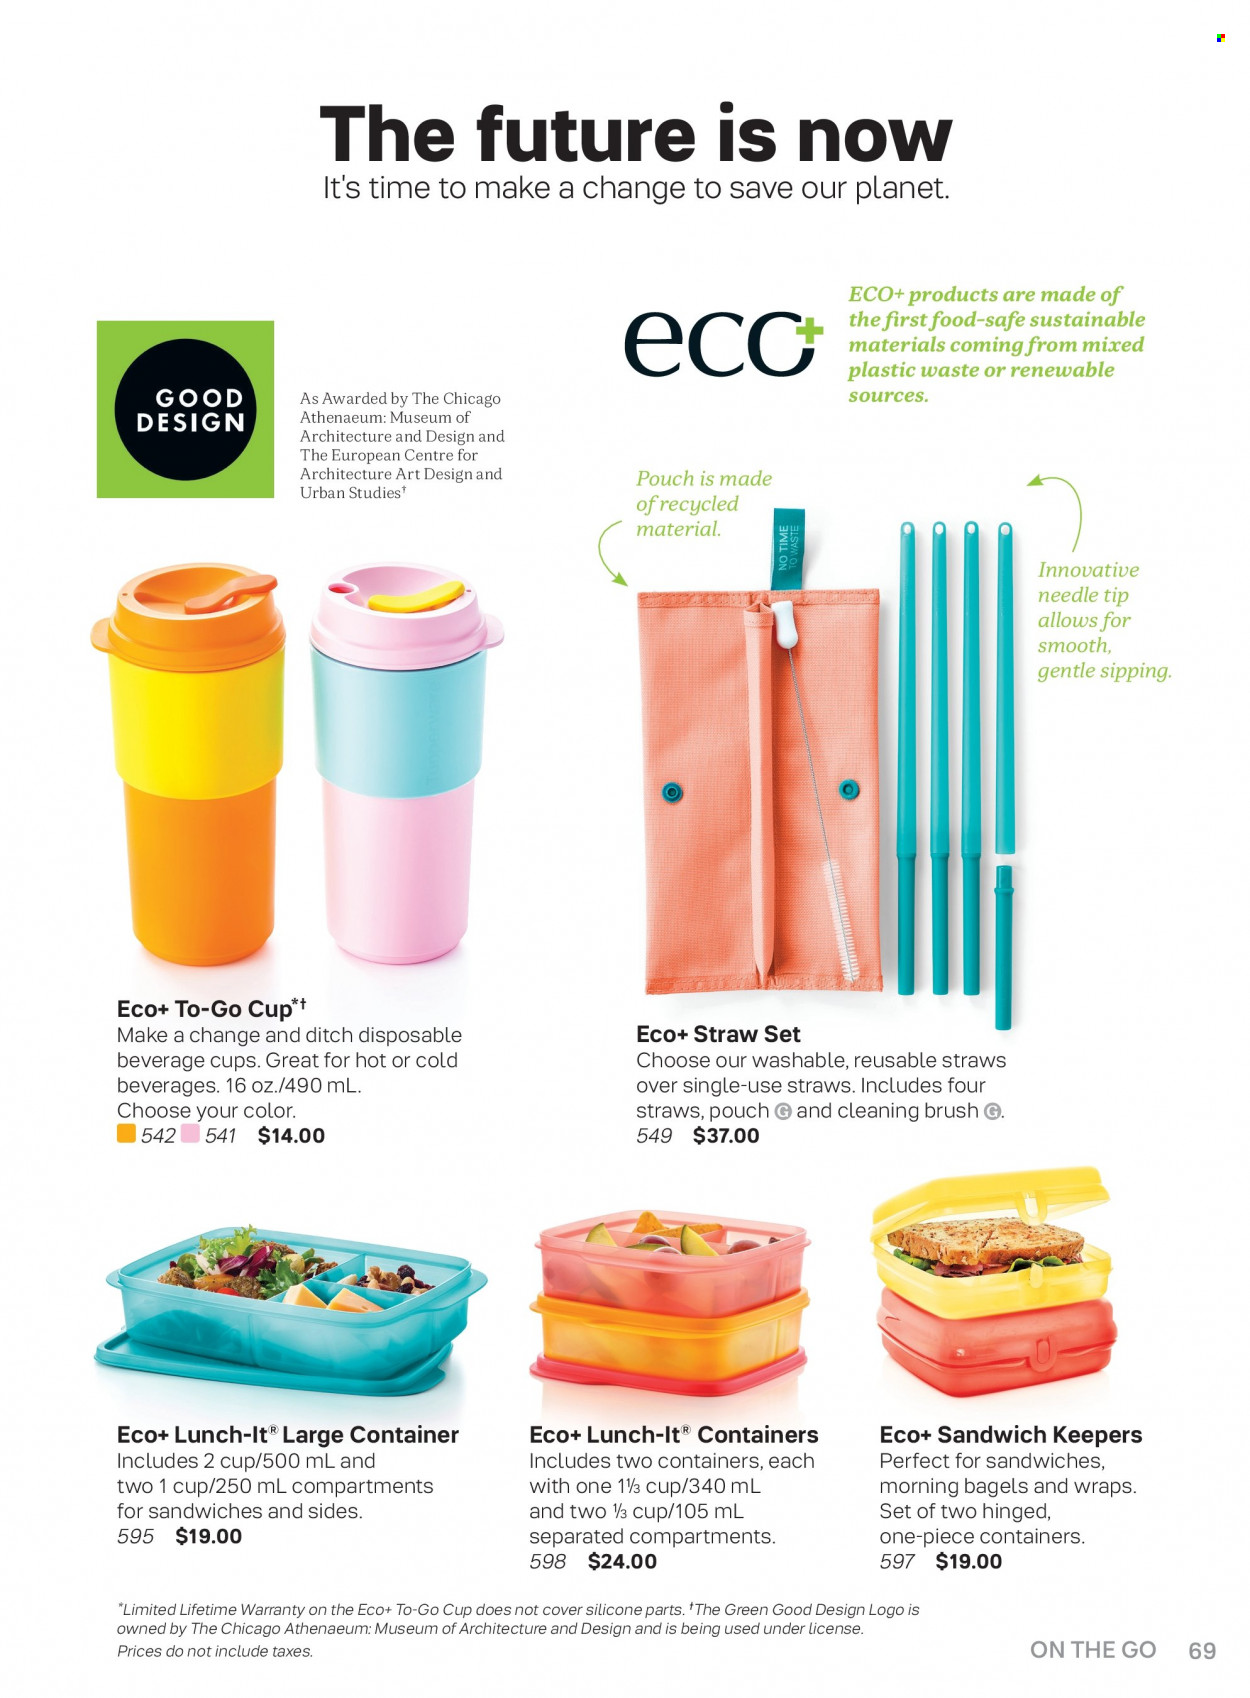 Circulaire Tupperware . Page 69.